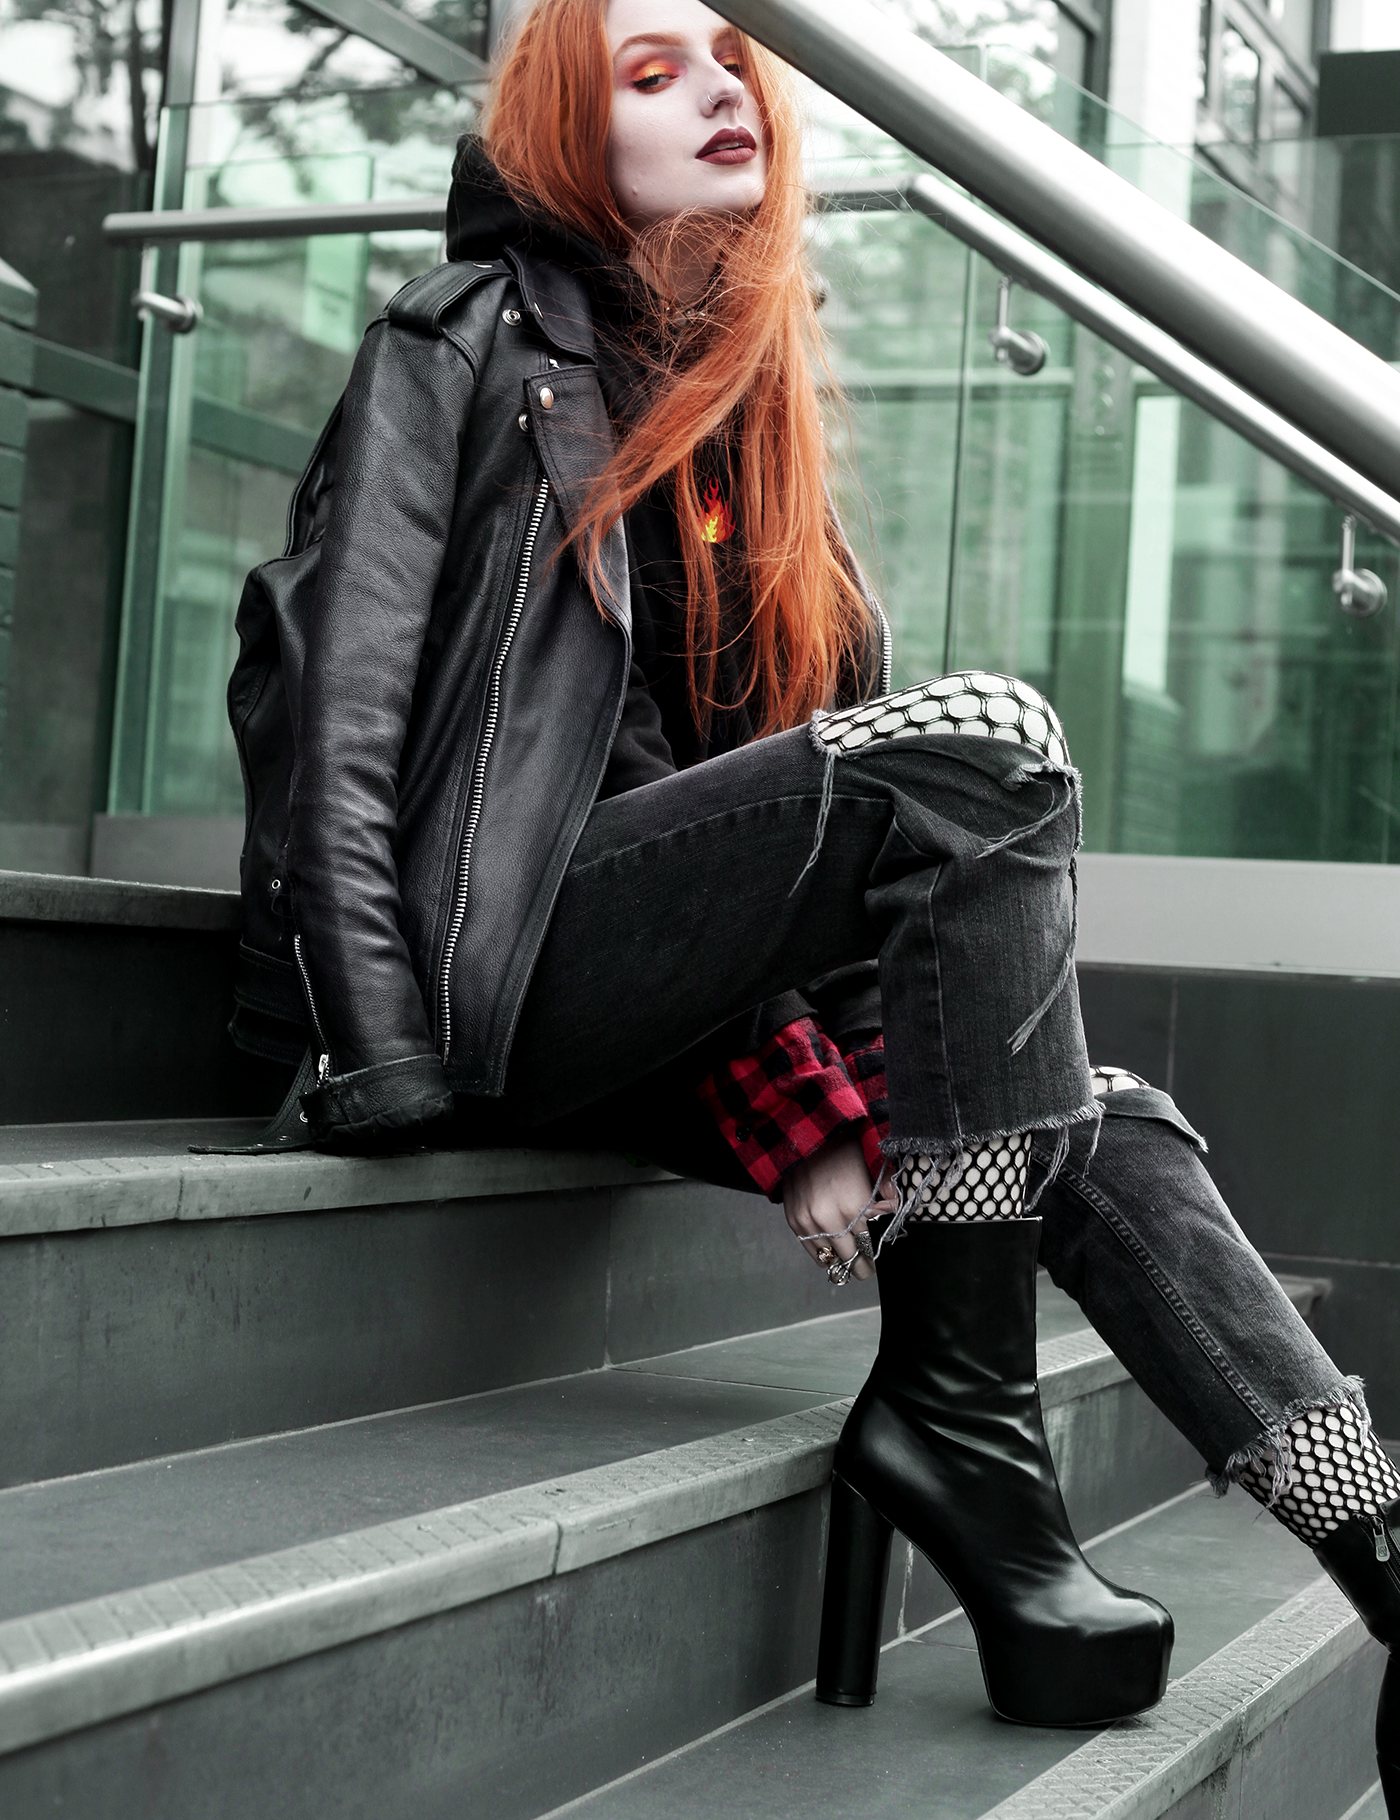 Dressed Up Casual - Olivia Emily wears Biker Jacket, Adolescent Clothing Fire Emoji Hoodie, Red Plaid Shirt, Asos Ripped Jeans, and Public Desire Platform Boots